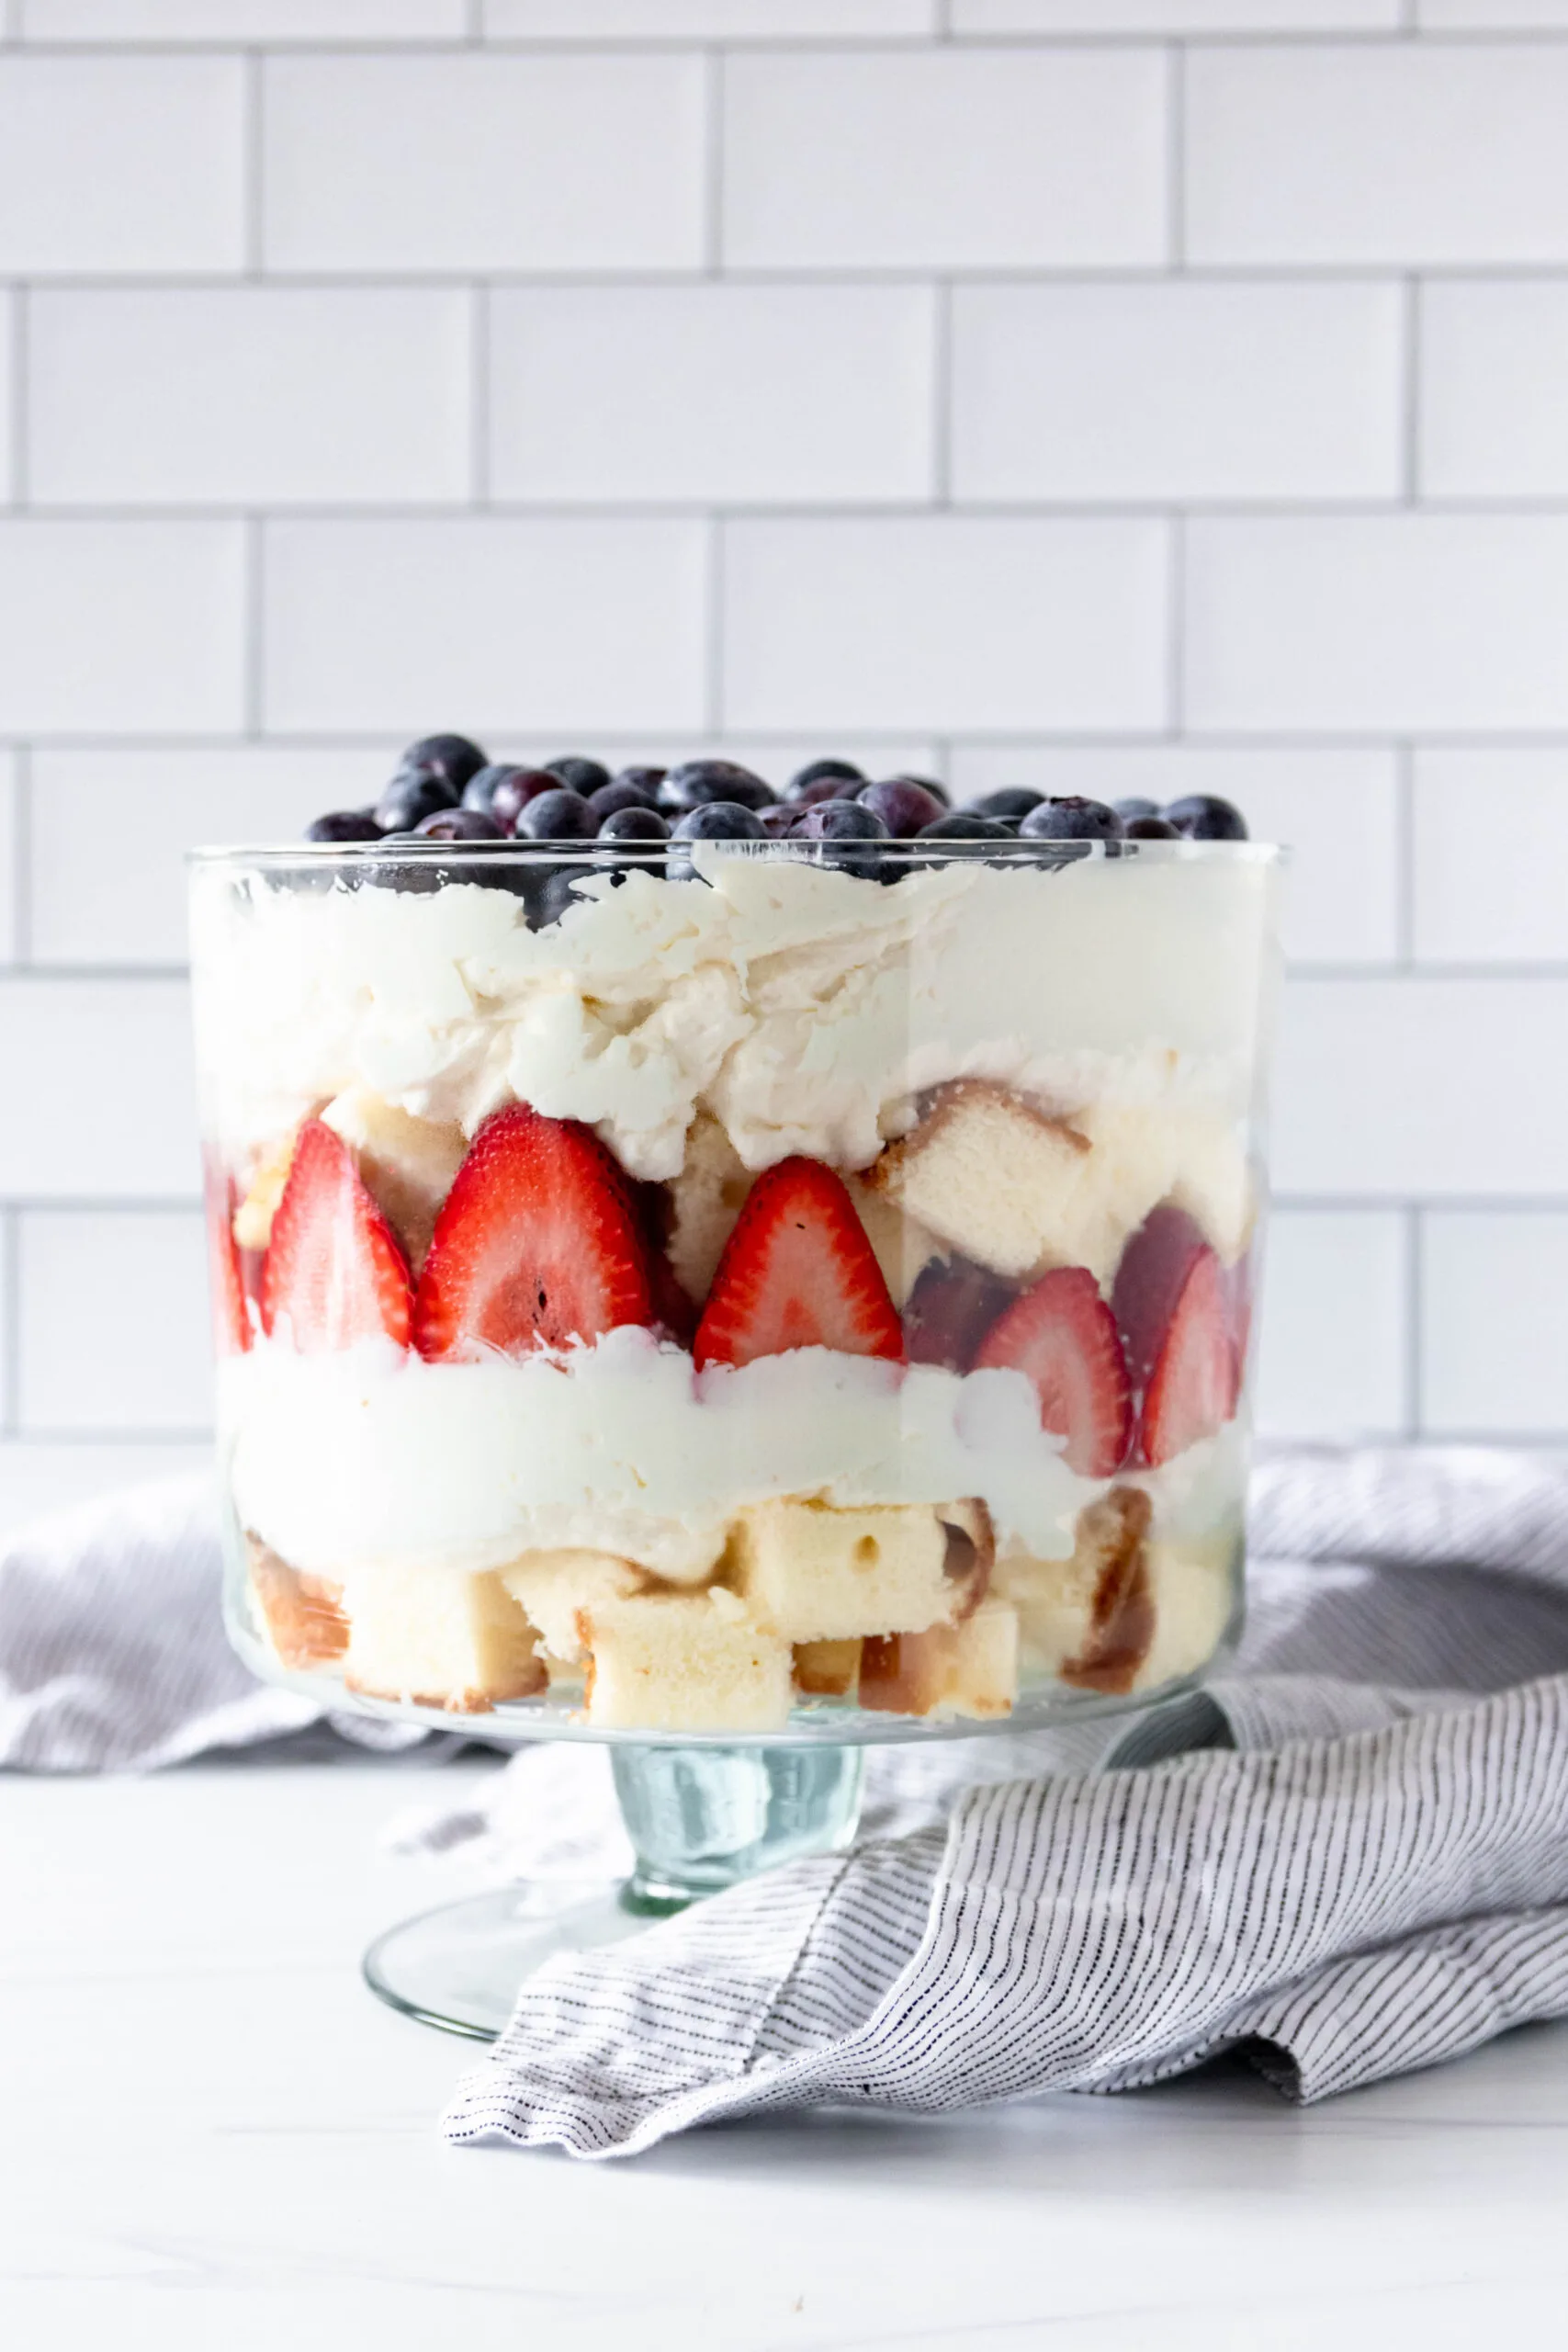 https://goodiegodmother.com/wp-content/uploads/2021/07/summer-berry-cheesecake-trifle-1-scaled.jpg.webp